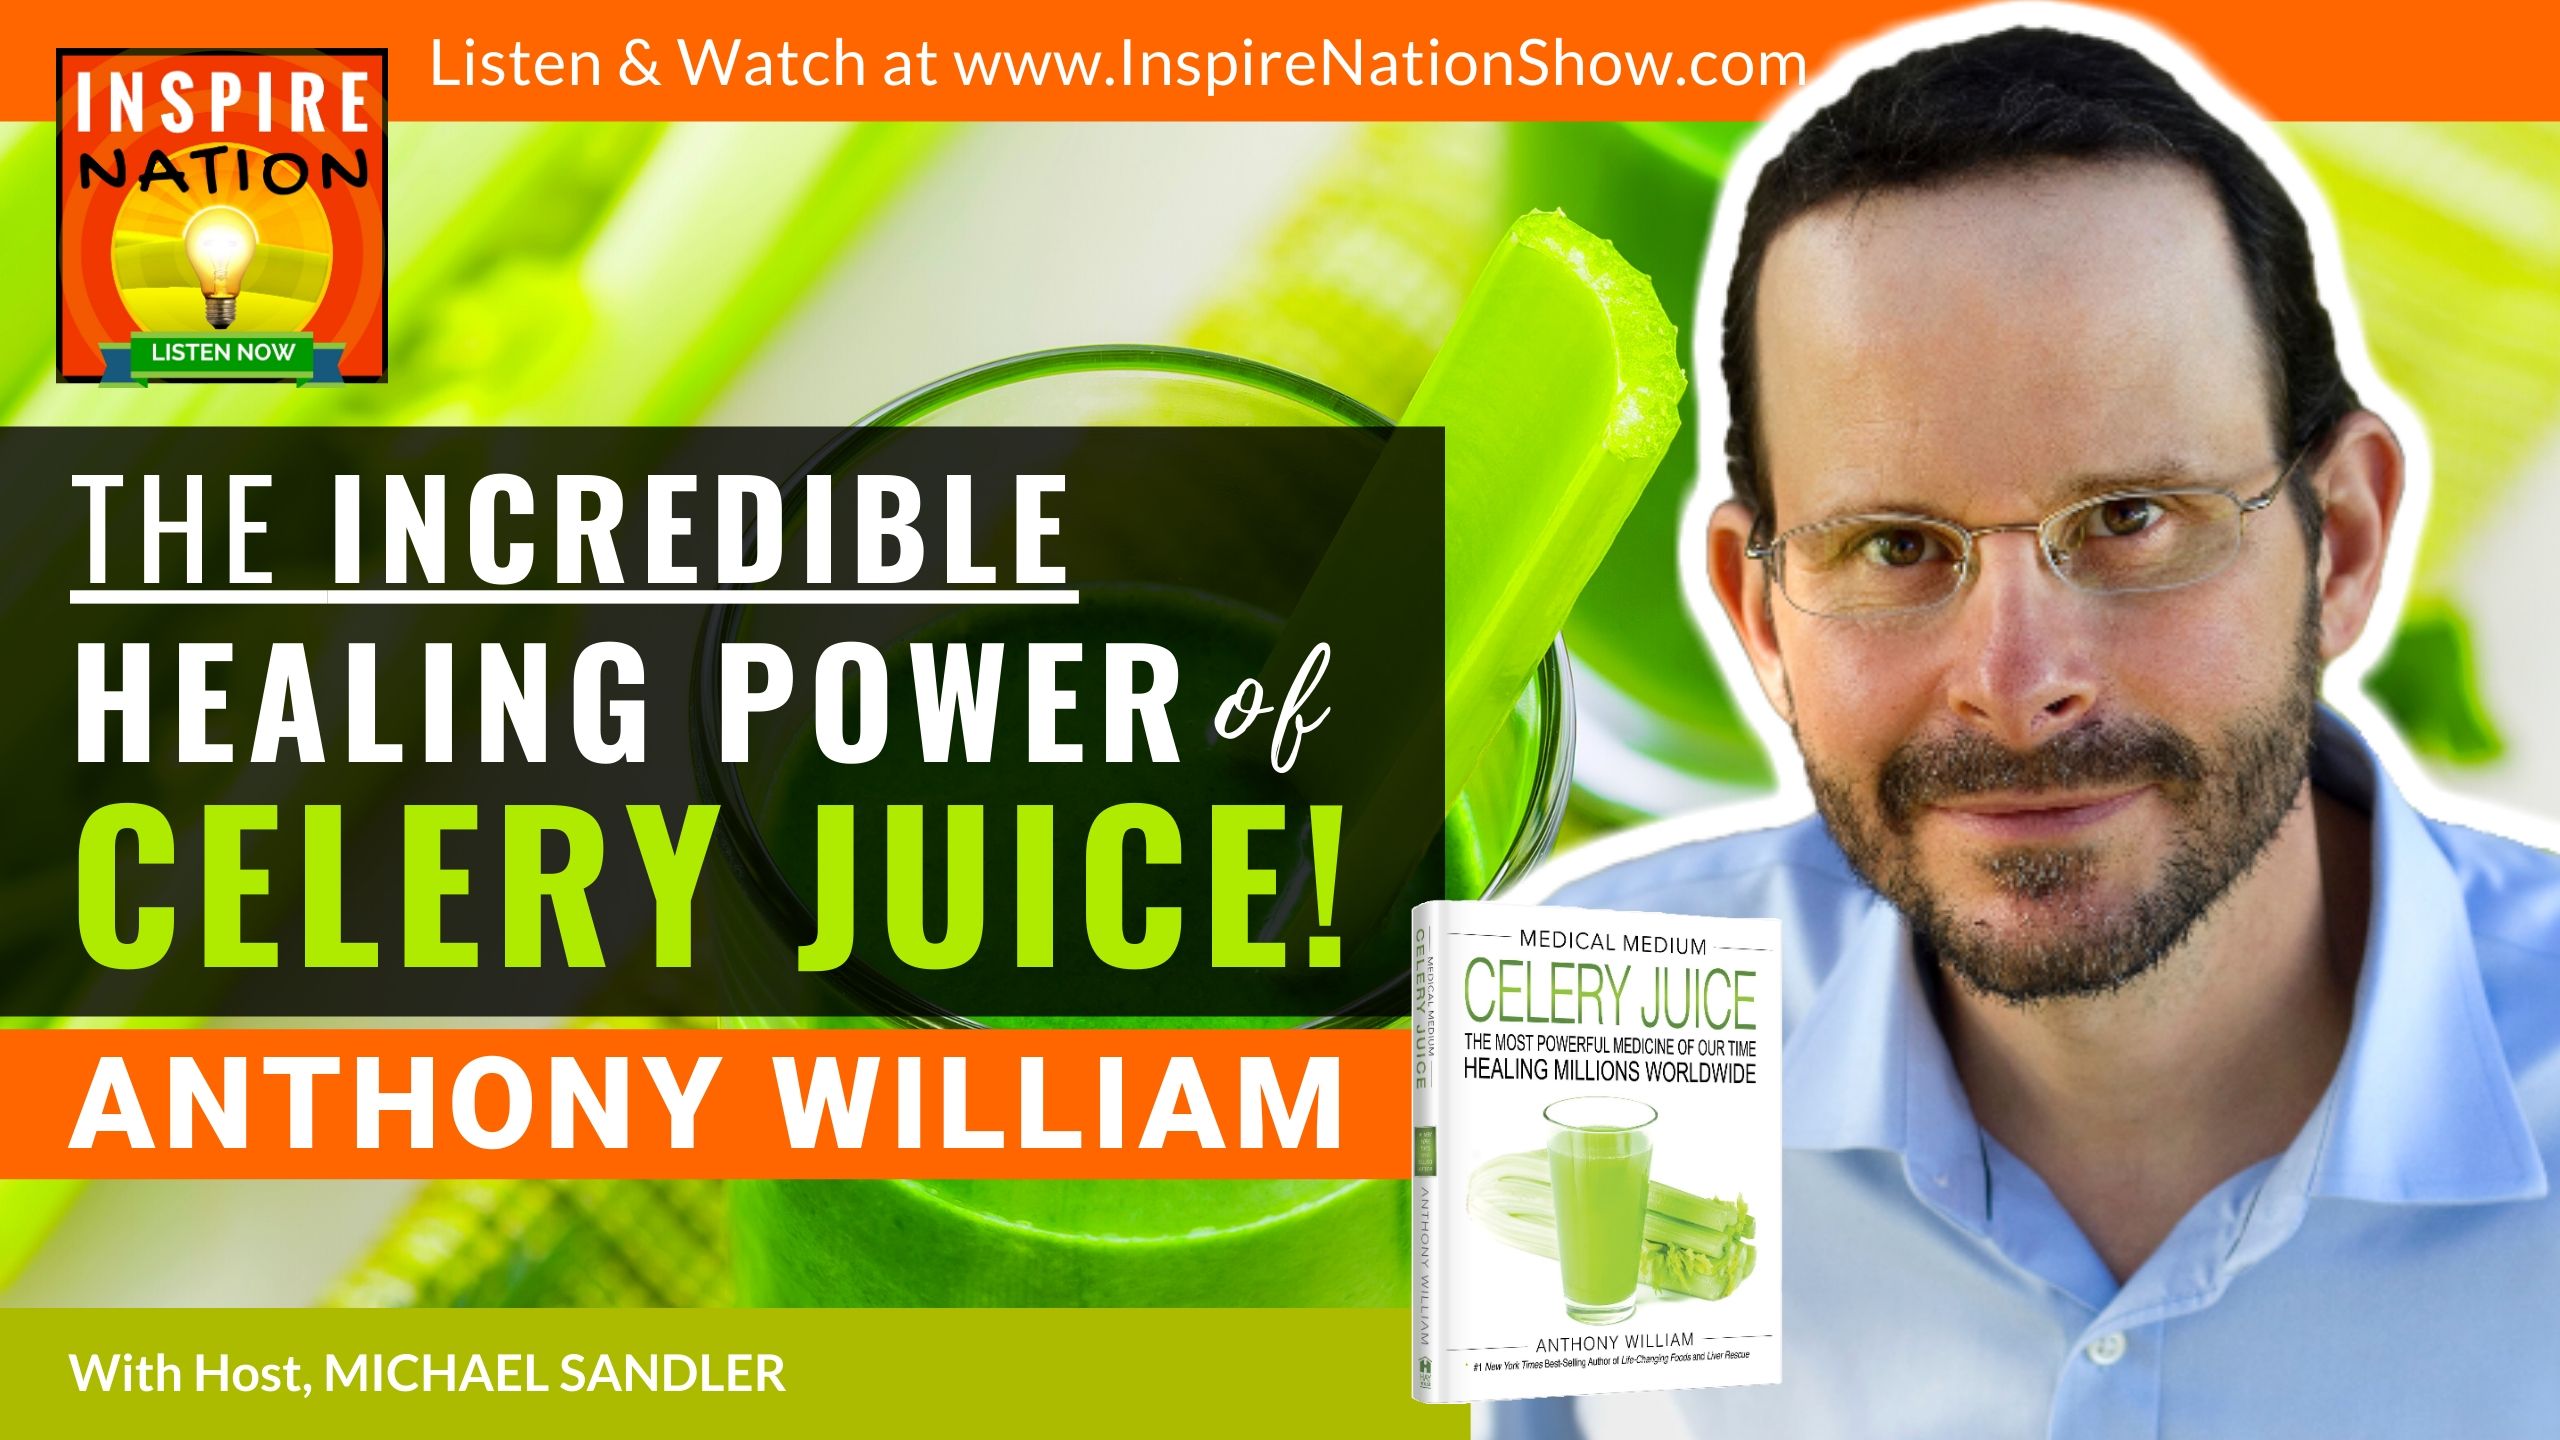 Michael Sandler interviews Medical Medium Anthony William on the life changing health benefits of drinking celery juice!